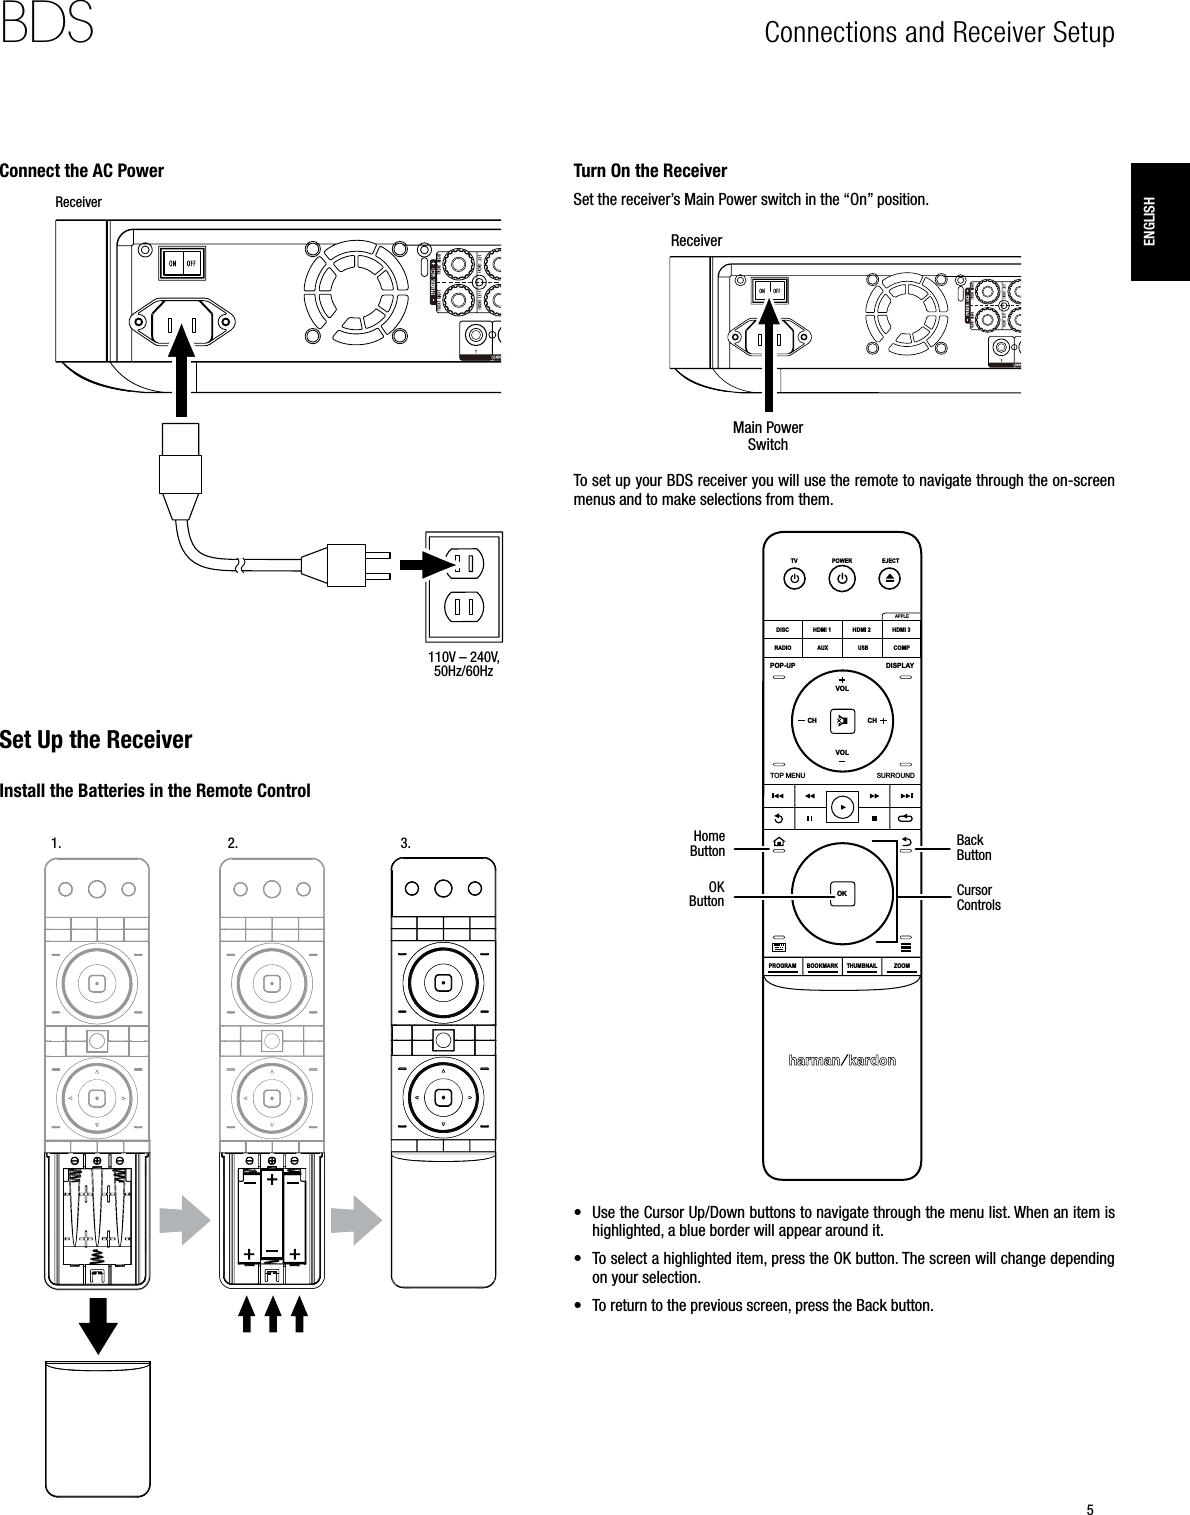 5BDSEnglishConnections and Receiver Setup Connect the AC Power110V – 240V, 50Hz/60HzReceiverSet Up the ReceiverInstall the Batteries in the Remote Control1. 2. 3.Turn On the ReceiverSet the receiver’s Main Power switch in the “On” position.ReceiverMain Power SwitchTo set up your BDS receiver you will use the remote to navigate through the on-screen menus and to make selections from them.OKPROGRAMBOOKMARK THUMBNAILZOOMTOP MENUSURROUNDVOLVOLPOP-UPDISPLAYPOWERTVDISCHDMI 1 HDMI 2 HDMI 3COMPUSBAUXRADIOEJECTAPPLECH CHHome  ButtonOK  Button Cursor  ControlsBack Button• Use the Cursor Up/Down buttons to navigate through the menu list. When an item is highlighted, a blue border will appear around it.• To select a highlighted item, press the OK button. The screen will change depending on your selection. • To return to the previous screen, press the Back button.